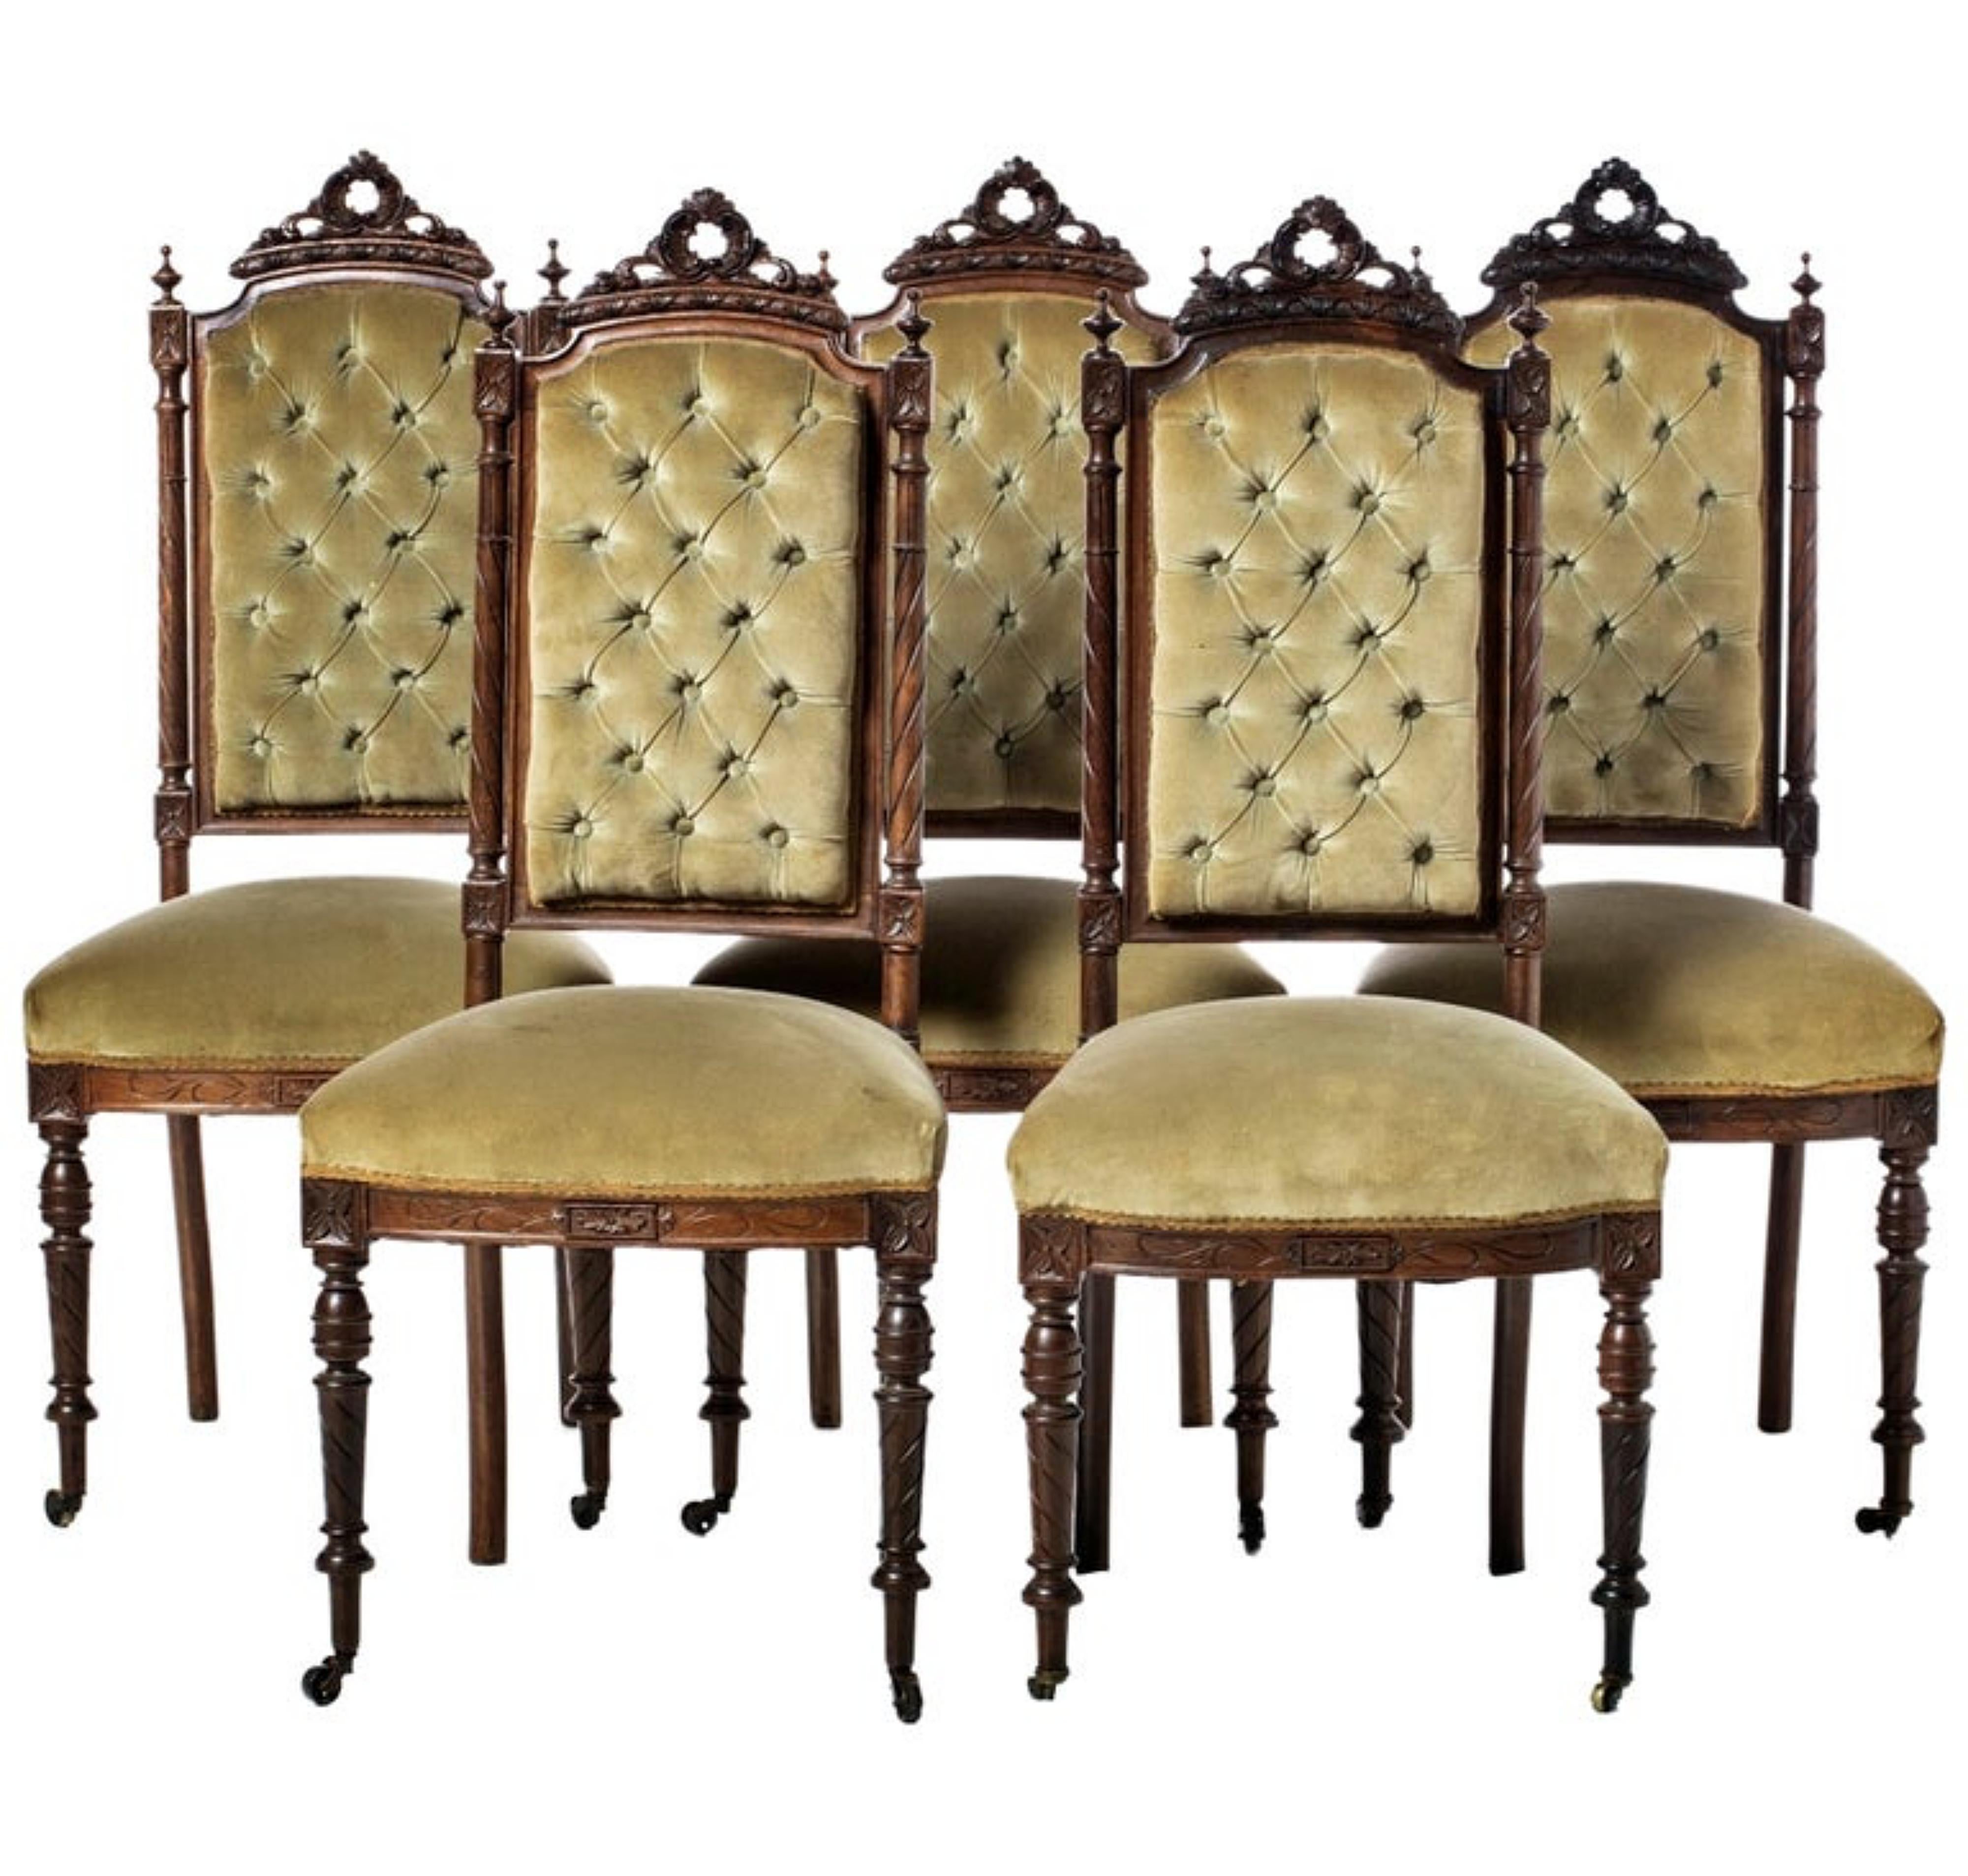 Five Portuguese Romantic Chairs 19th Century In Good Condition For Sale In Madrid, ES